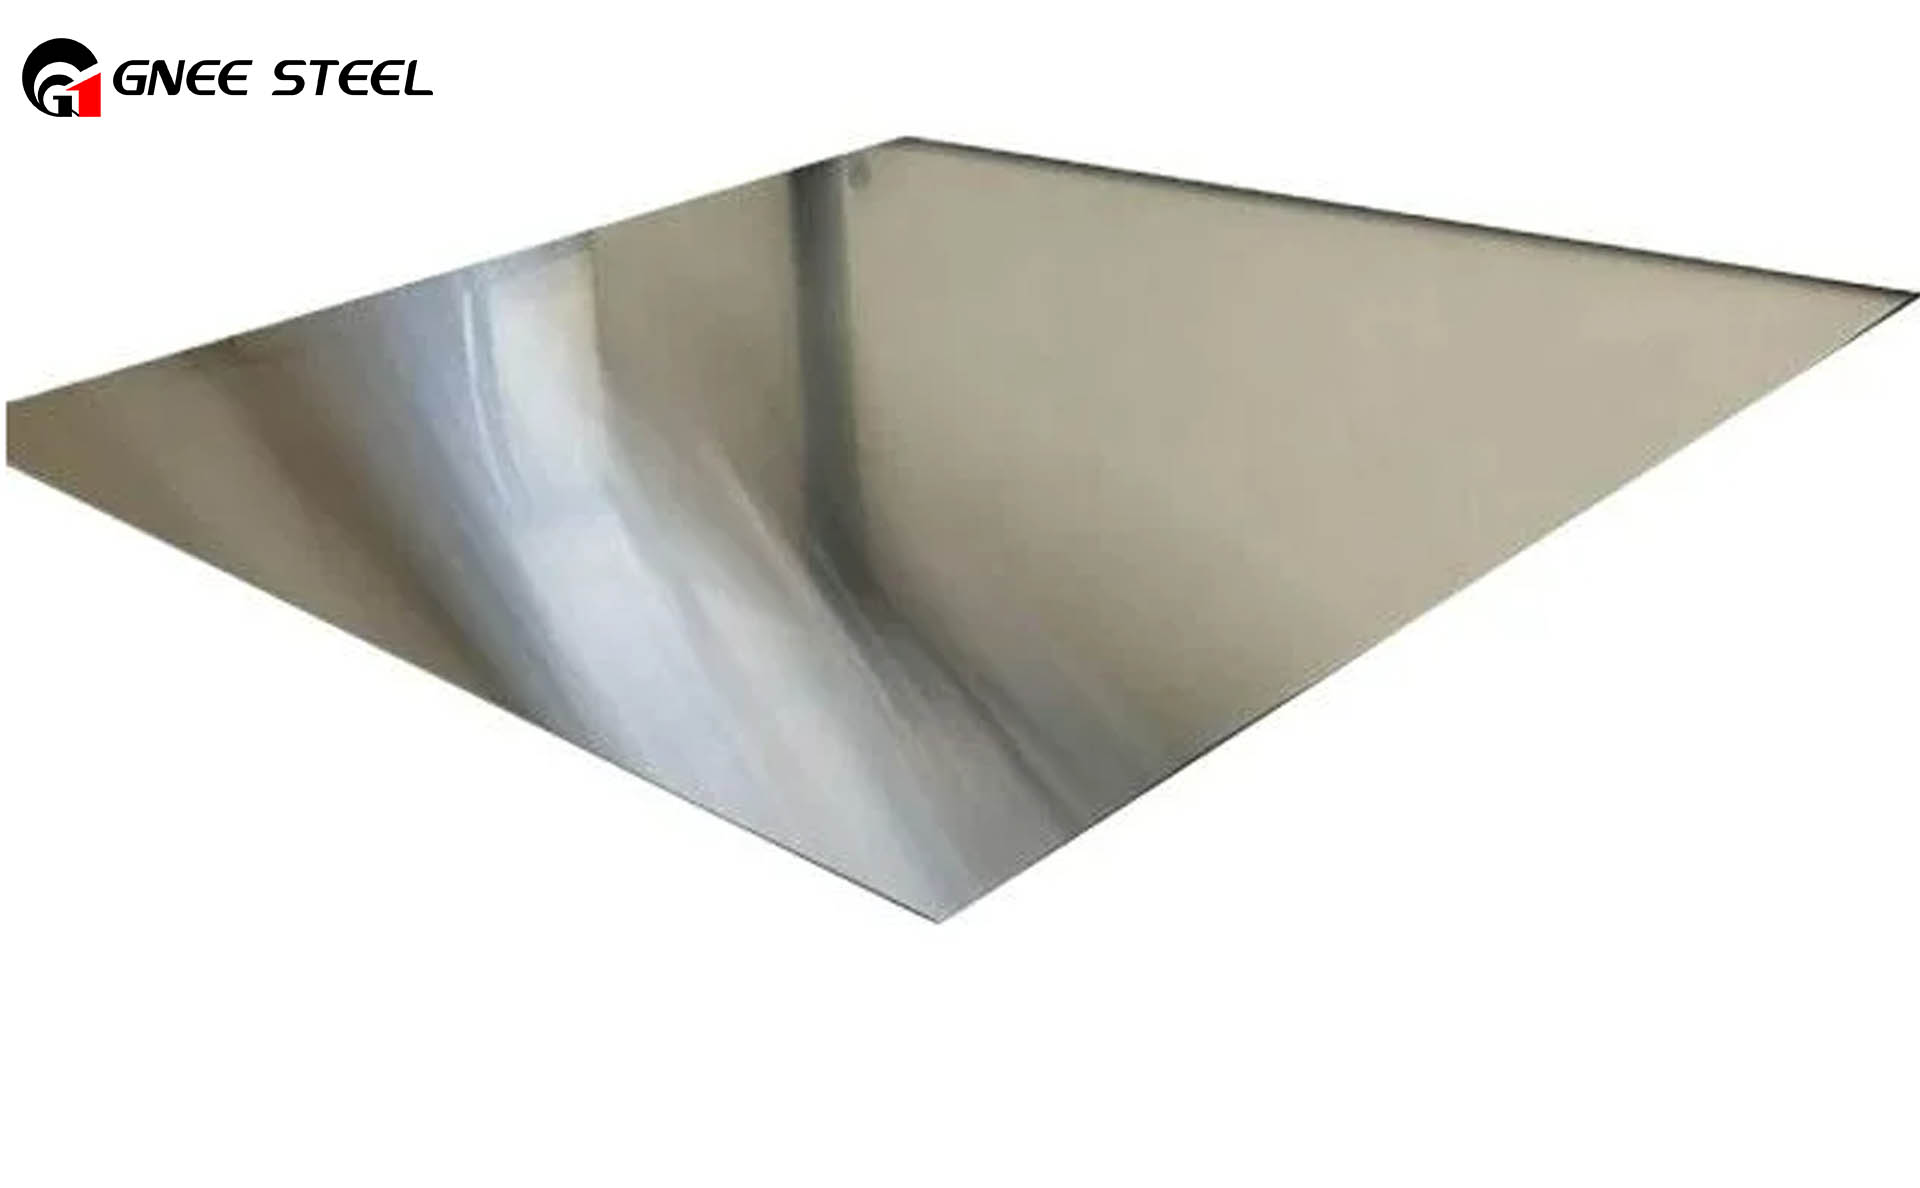 Classification of cold rolled steel plates